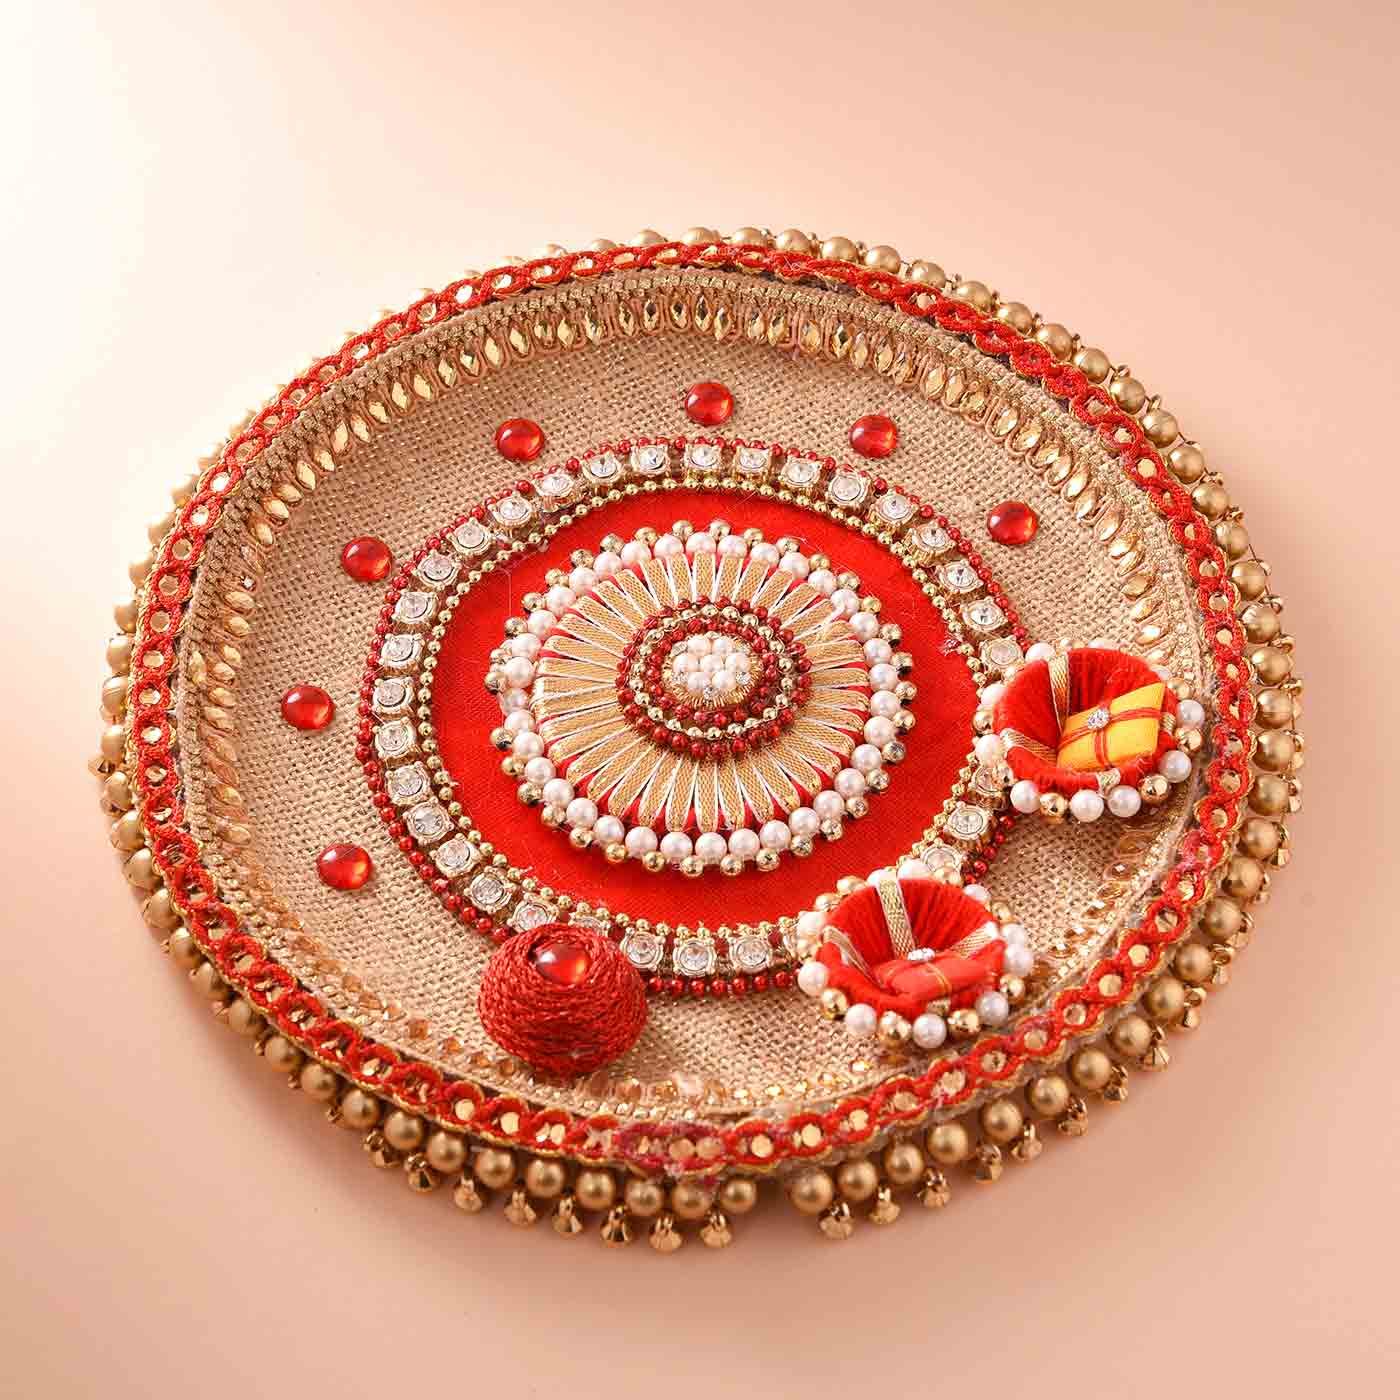 Golden & Red Color Rakhi Puja Thali 8 Inches - 12 Pcs Pack